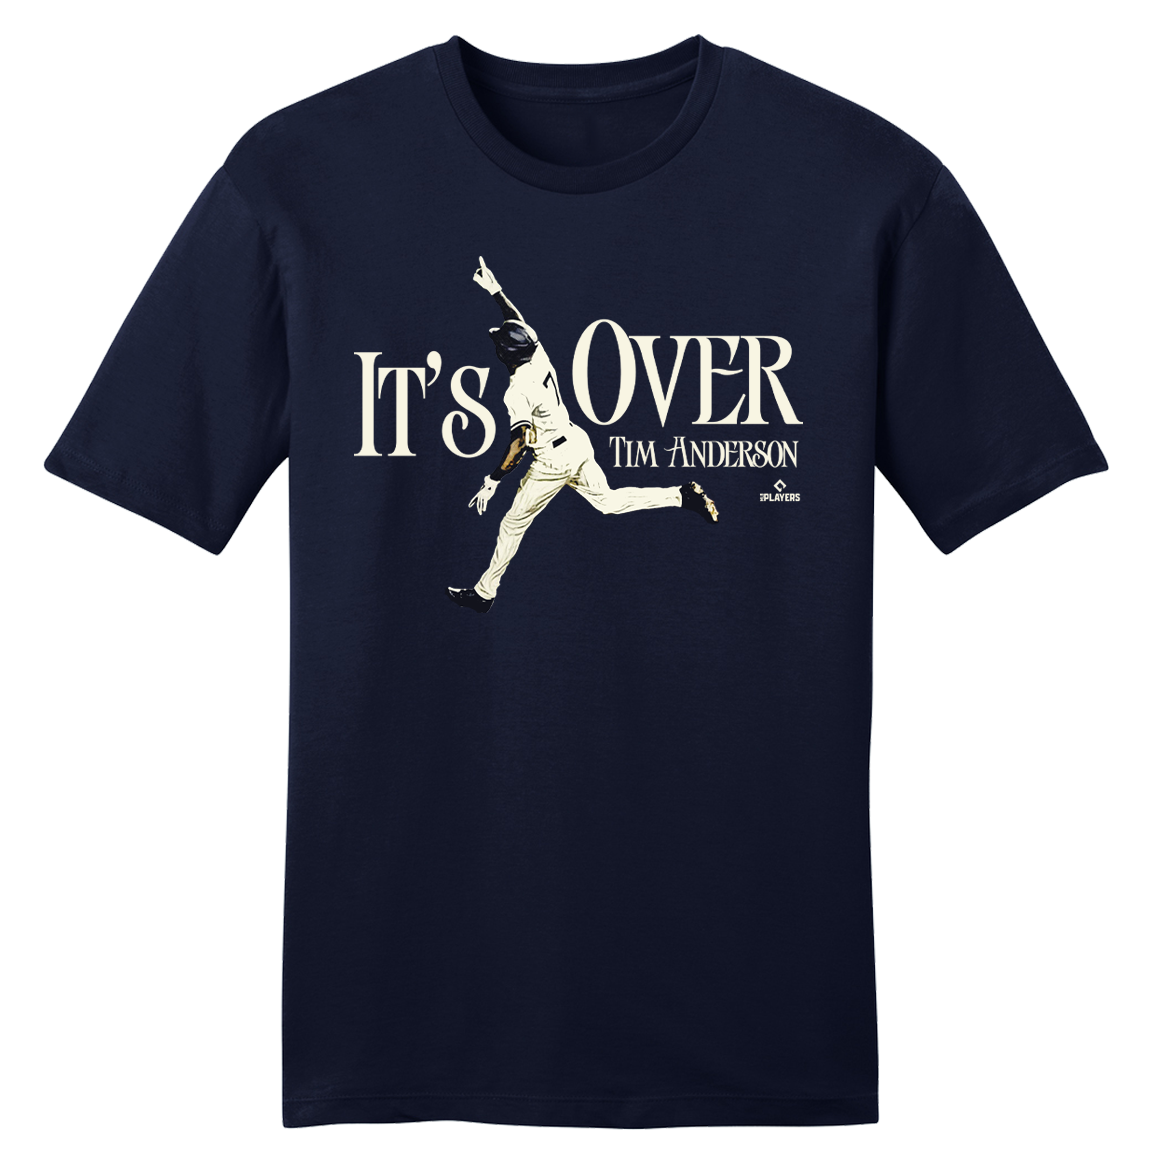 Tim Anderson - It's Over - MLBPA Tee